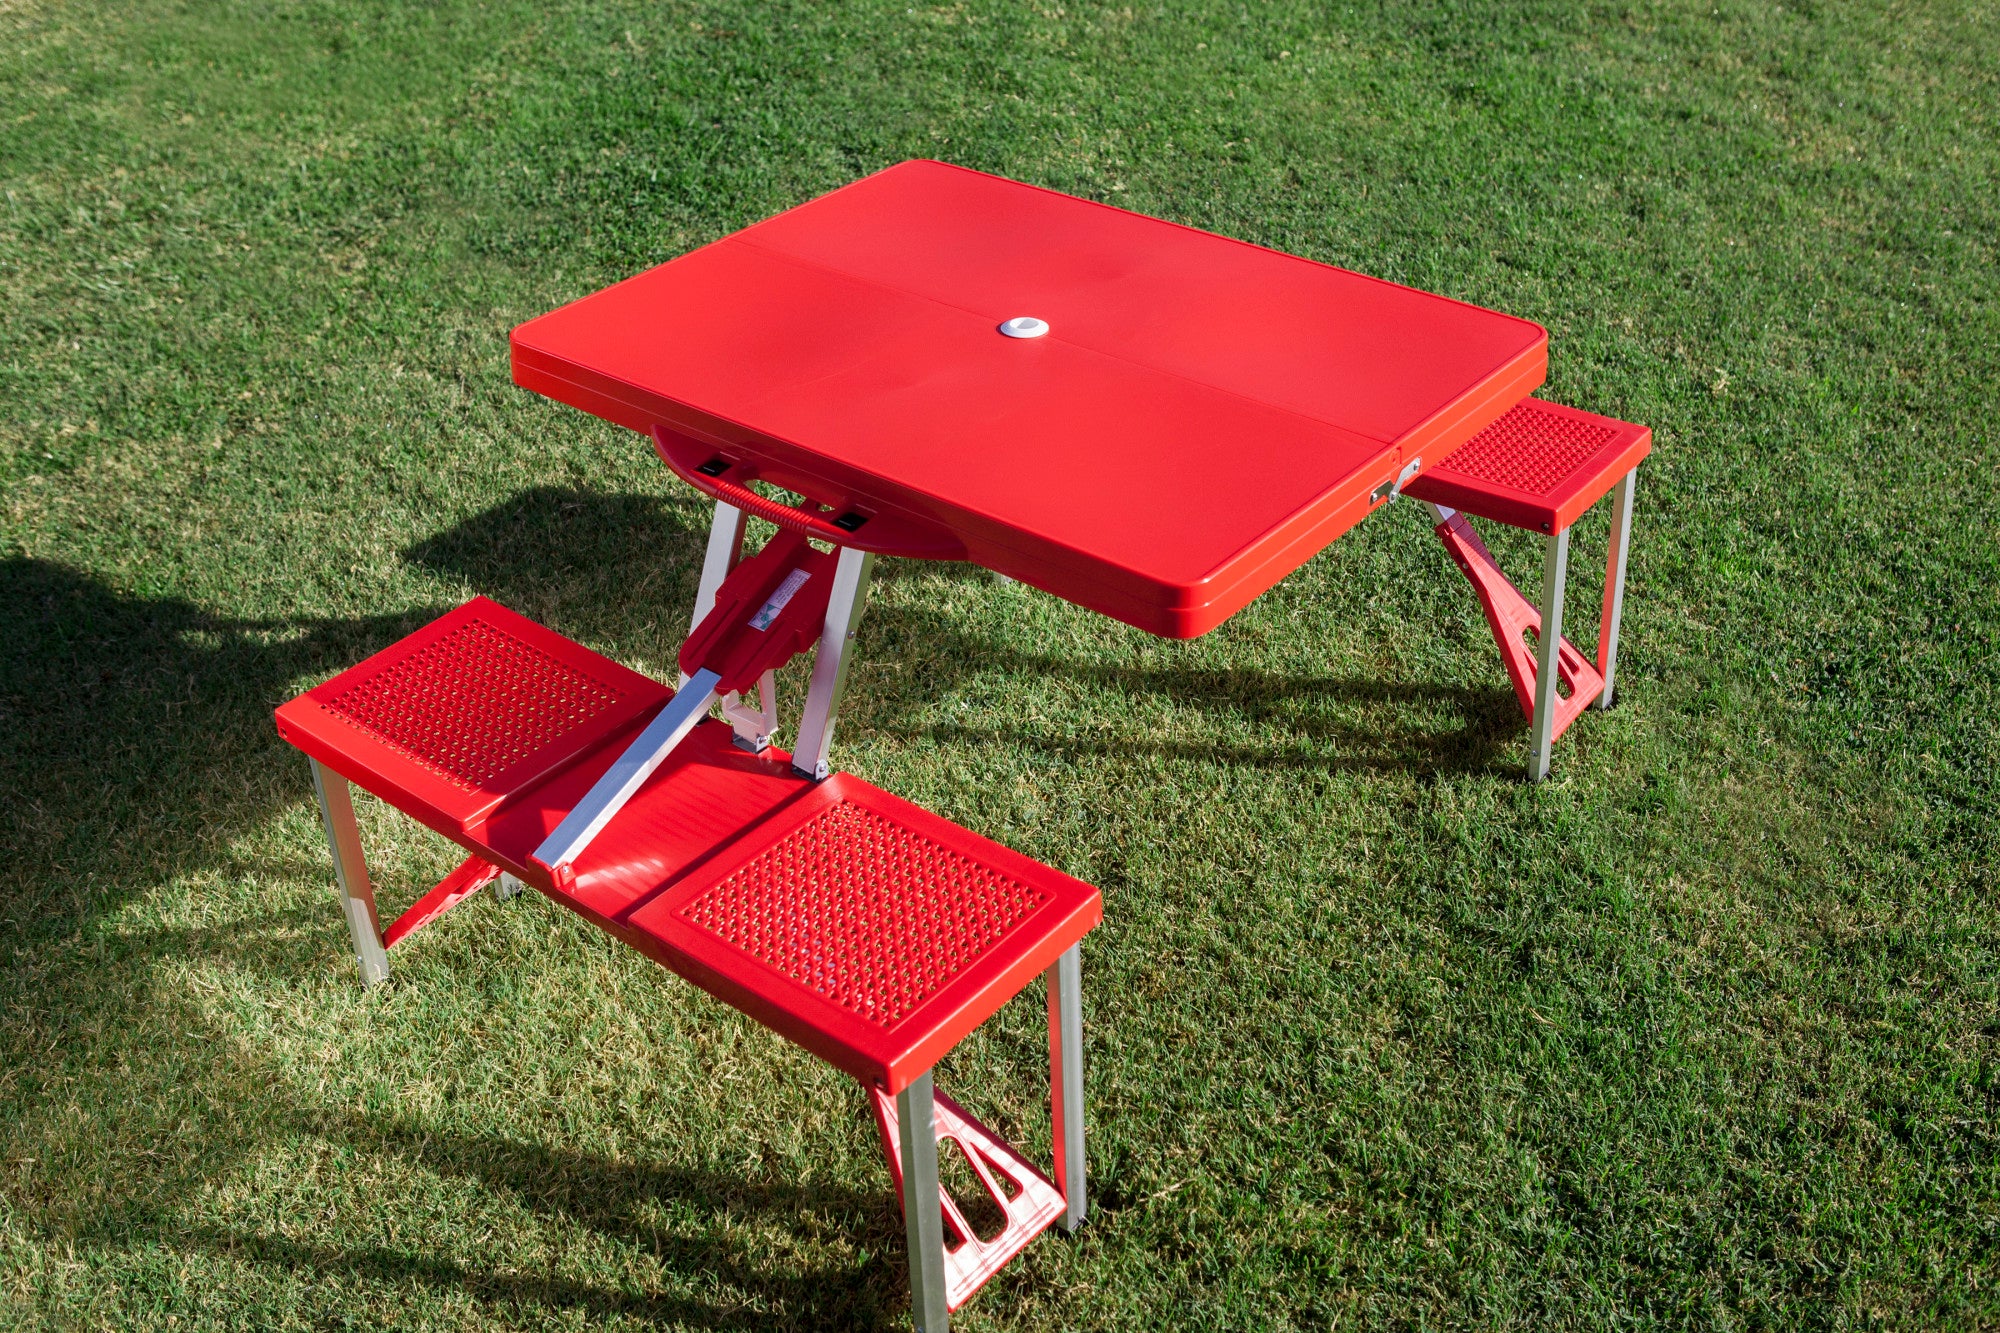 Football Field - New England Patriots - Picnic Table Portable Folding Table with Seats